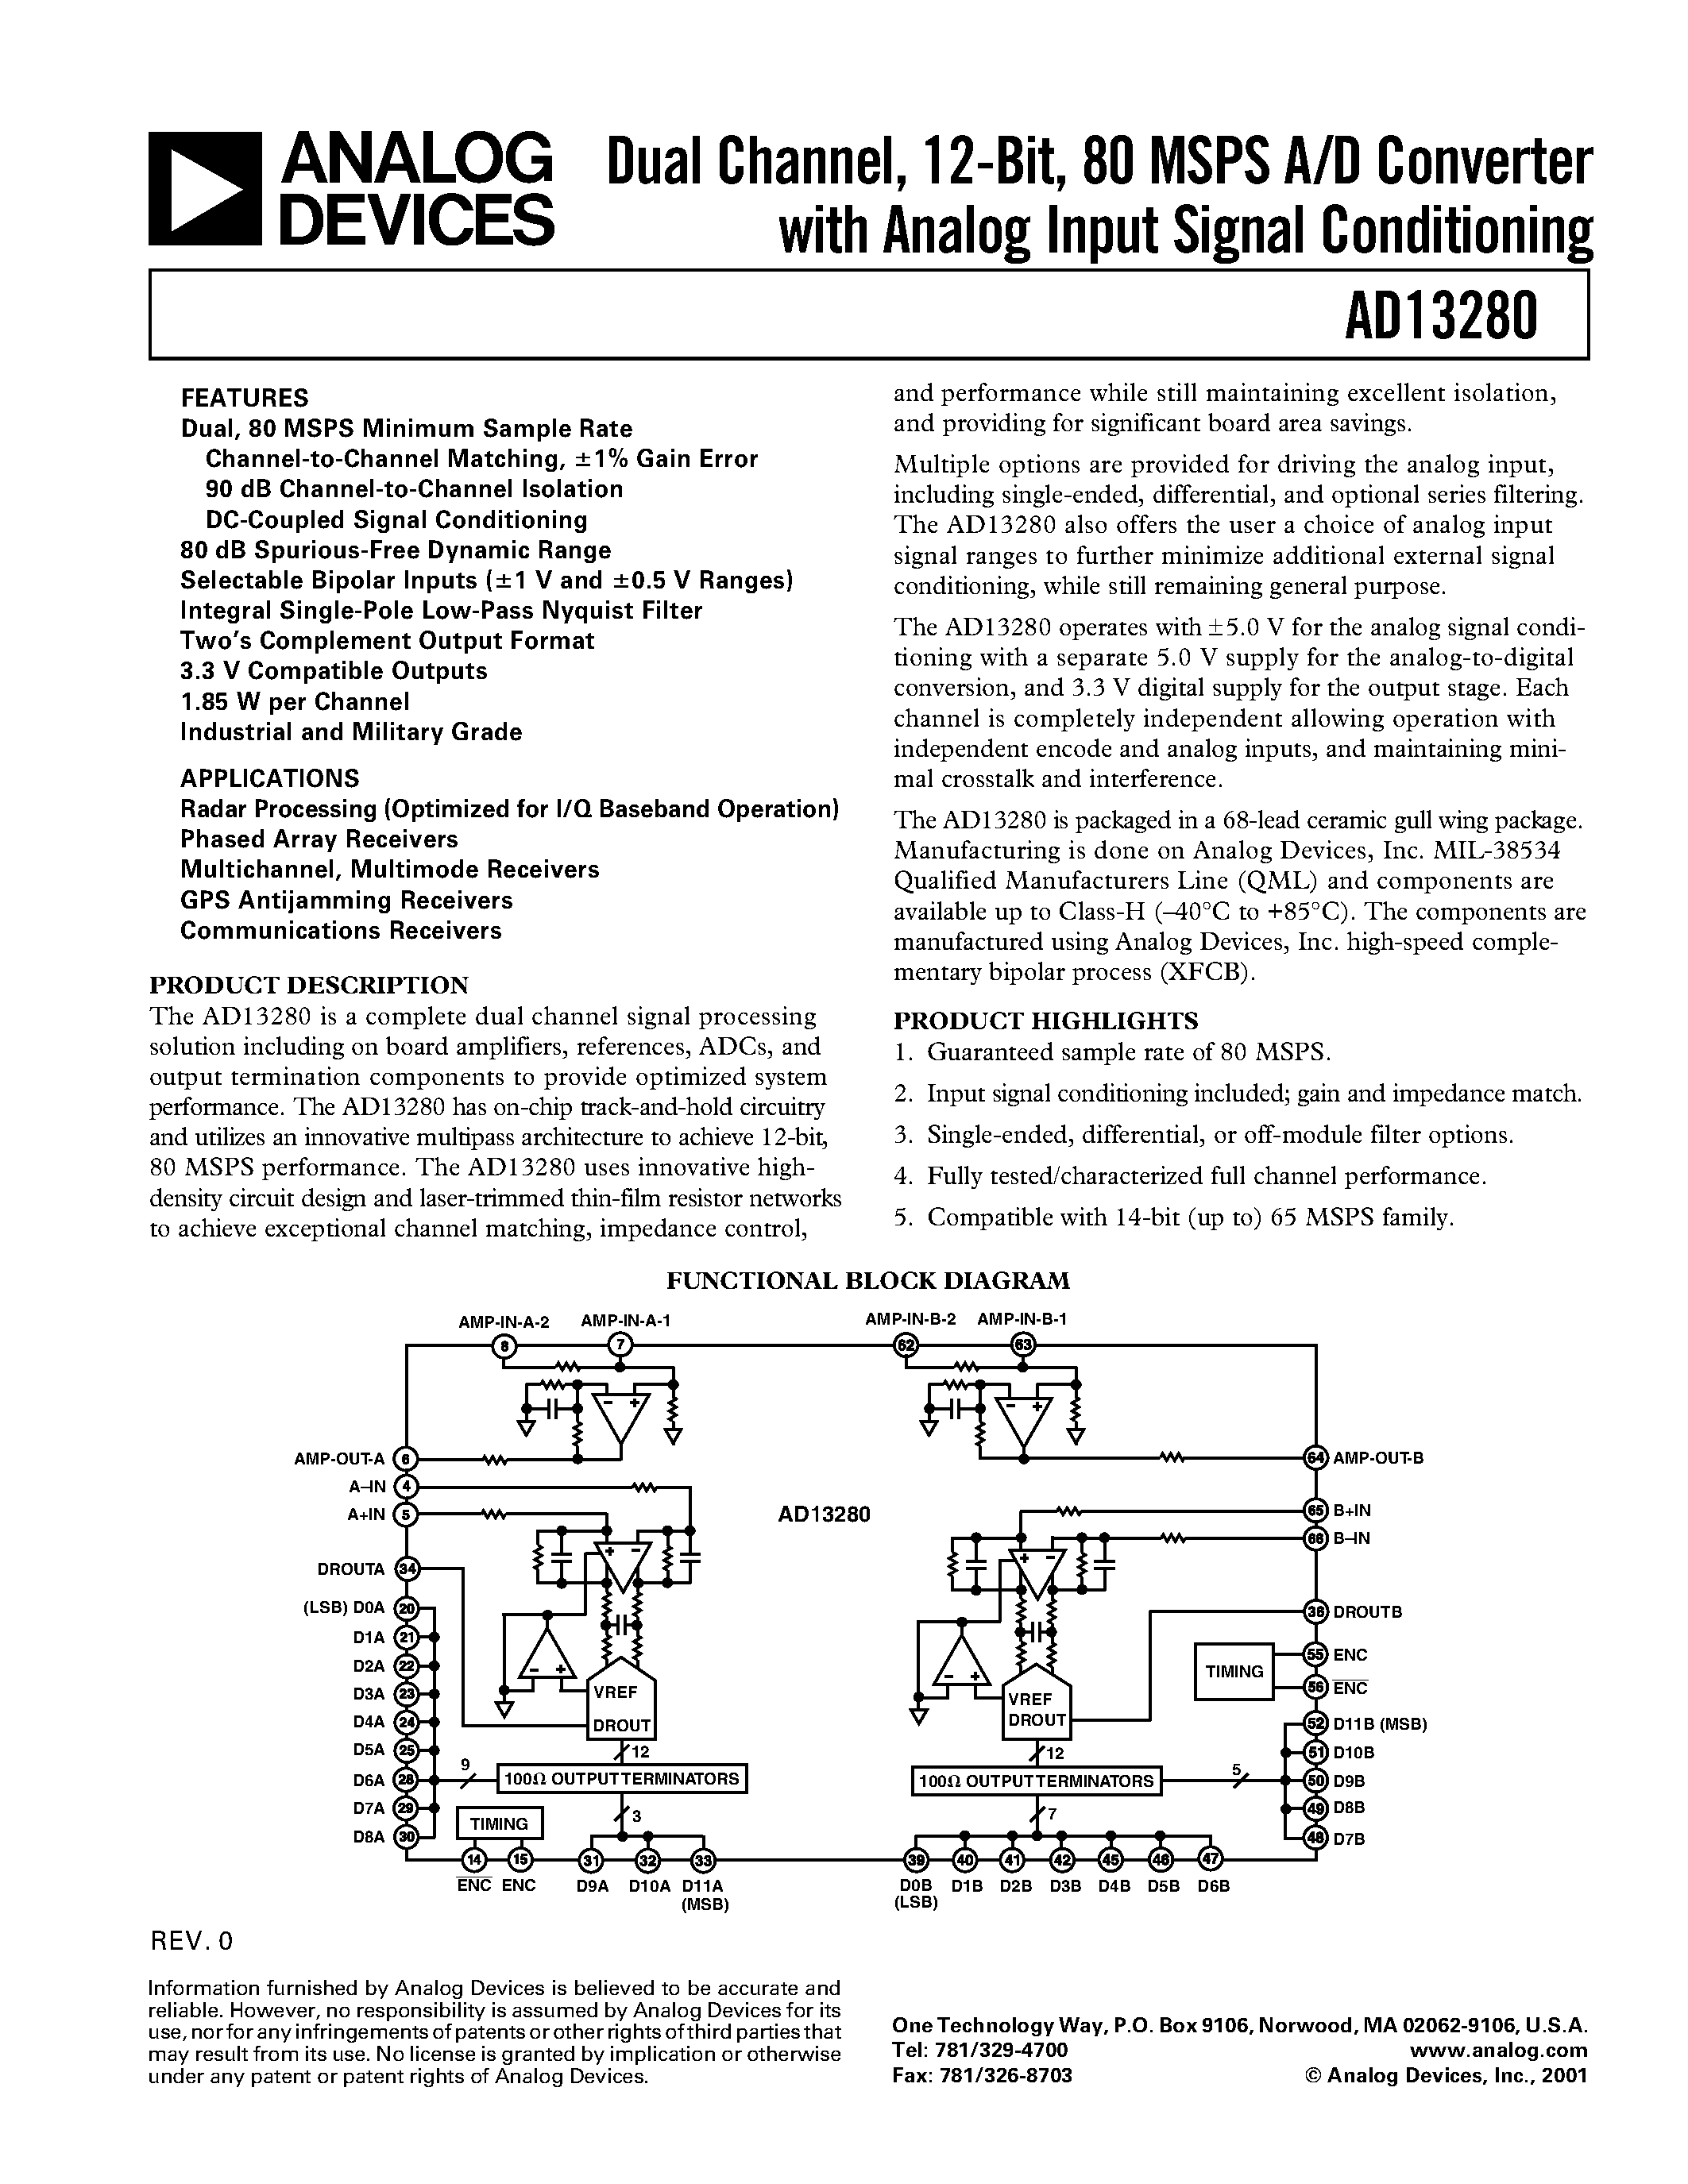 Даташит AD13280BZ - Dual Channel/ 12-Bit/ 80 MSPS A/D Converter with Analog Input Signal Conditioning страница 1